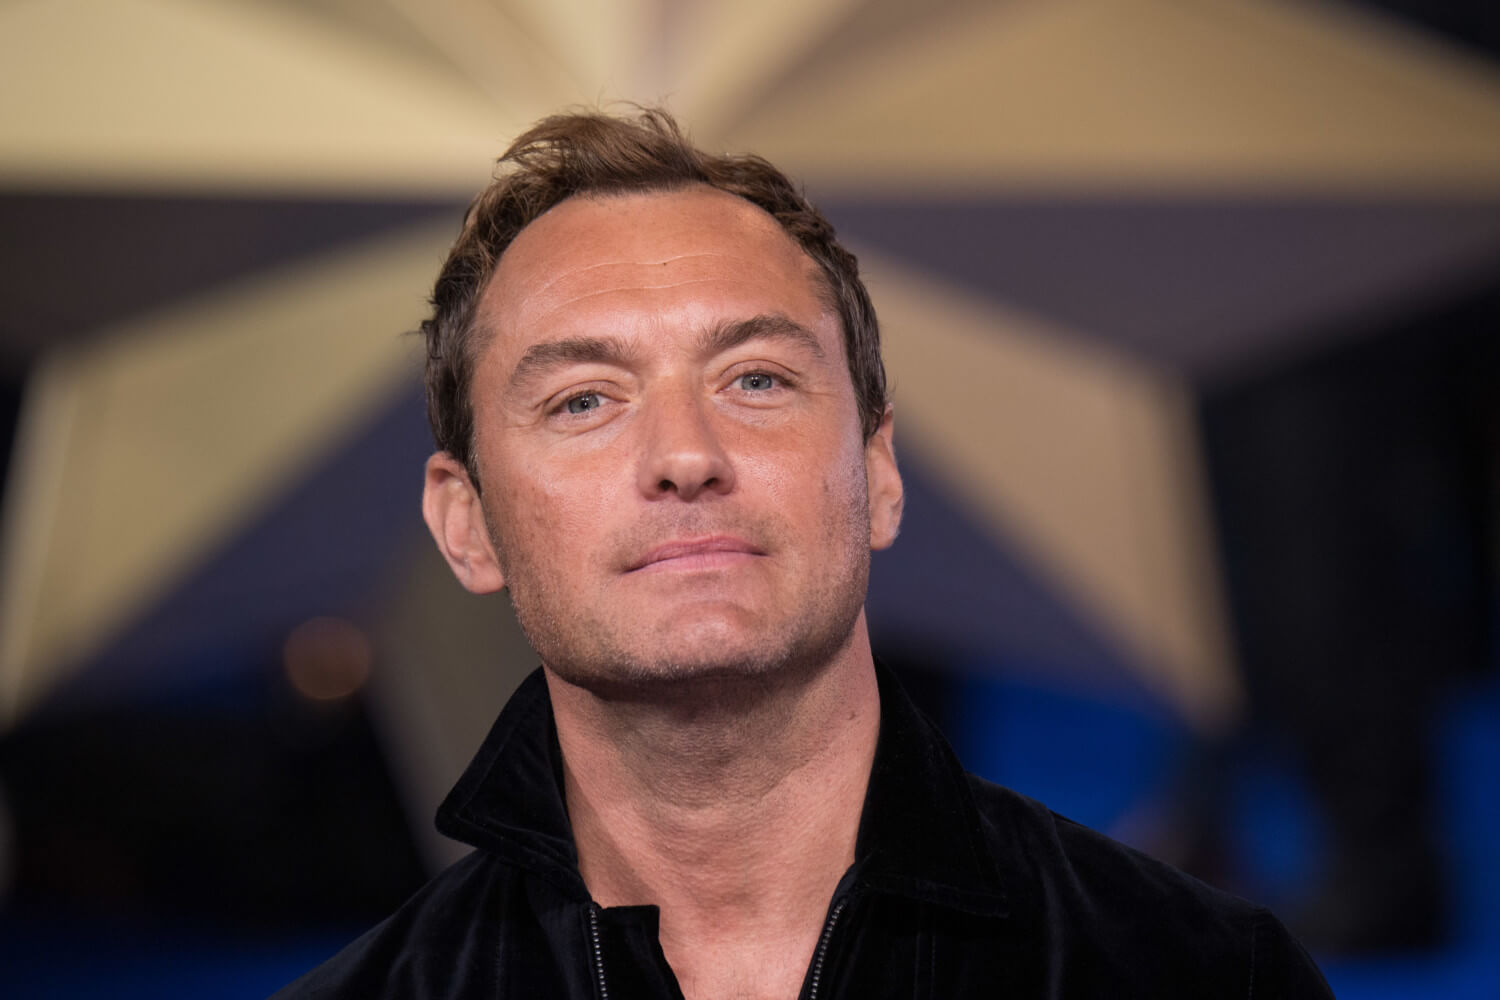 English actor, Jude Law to star in Star Wars show.